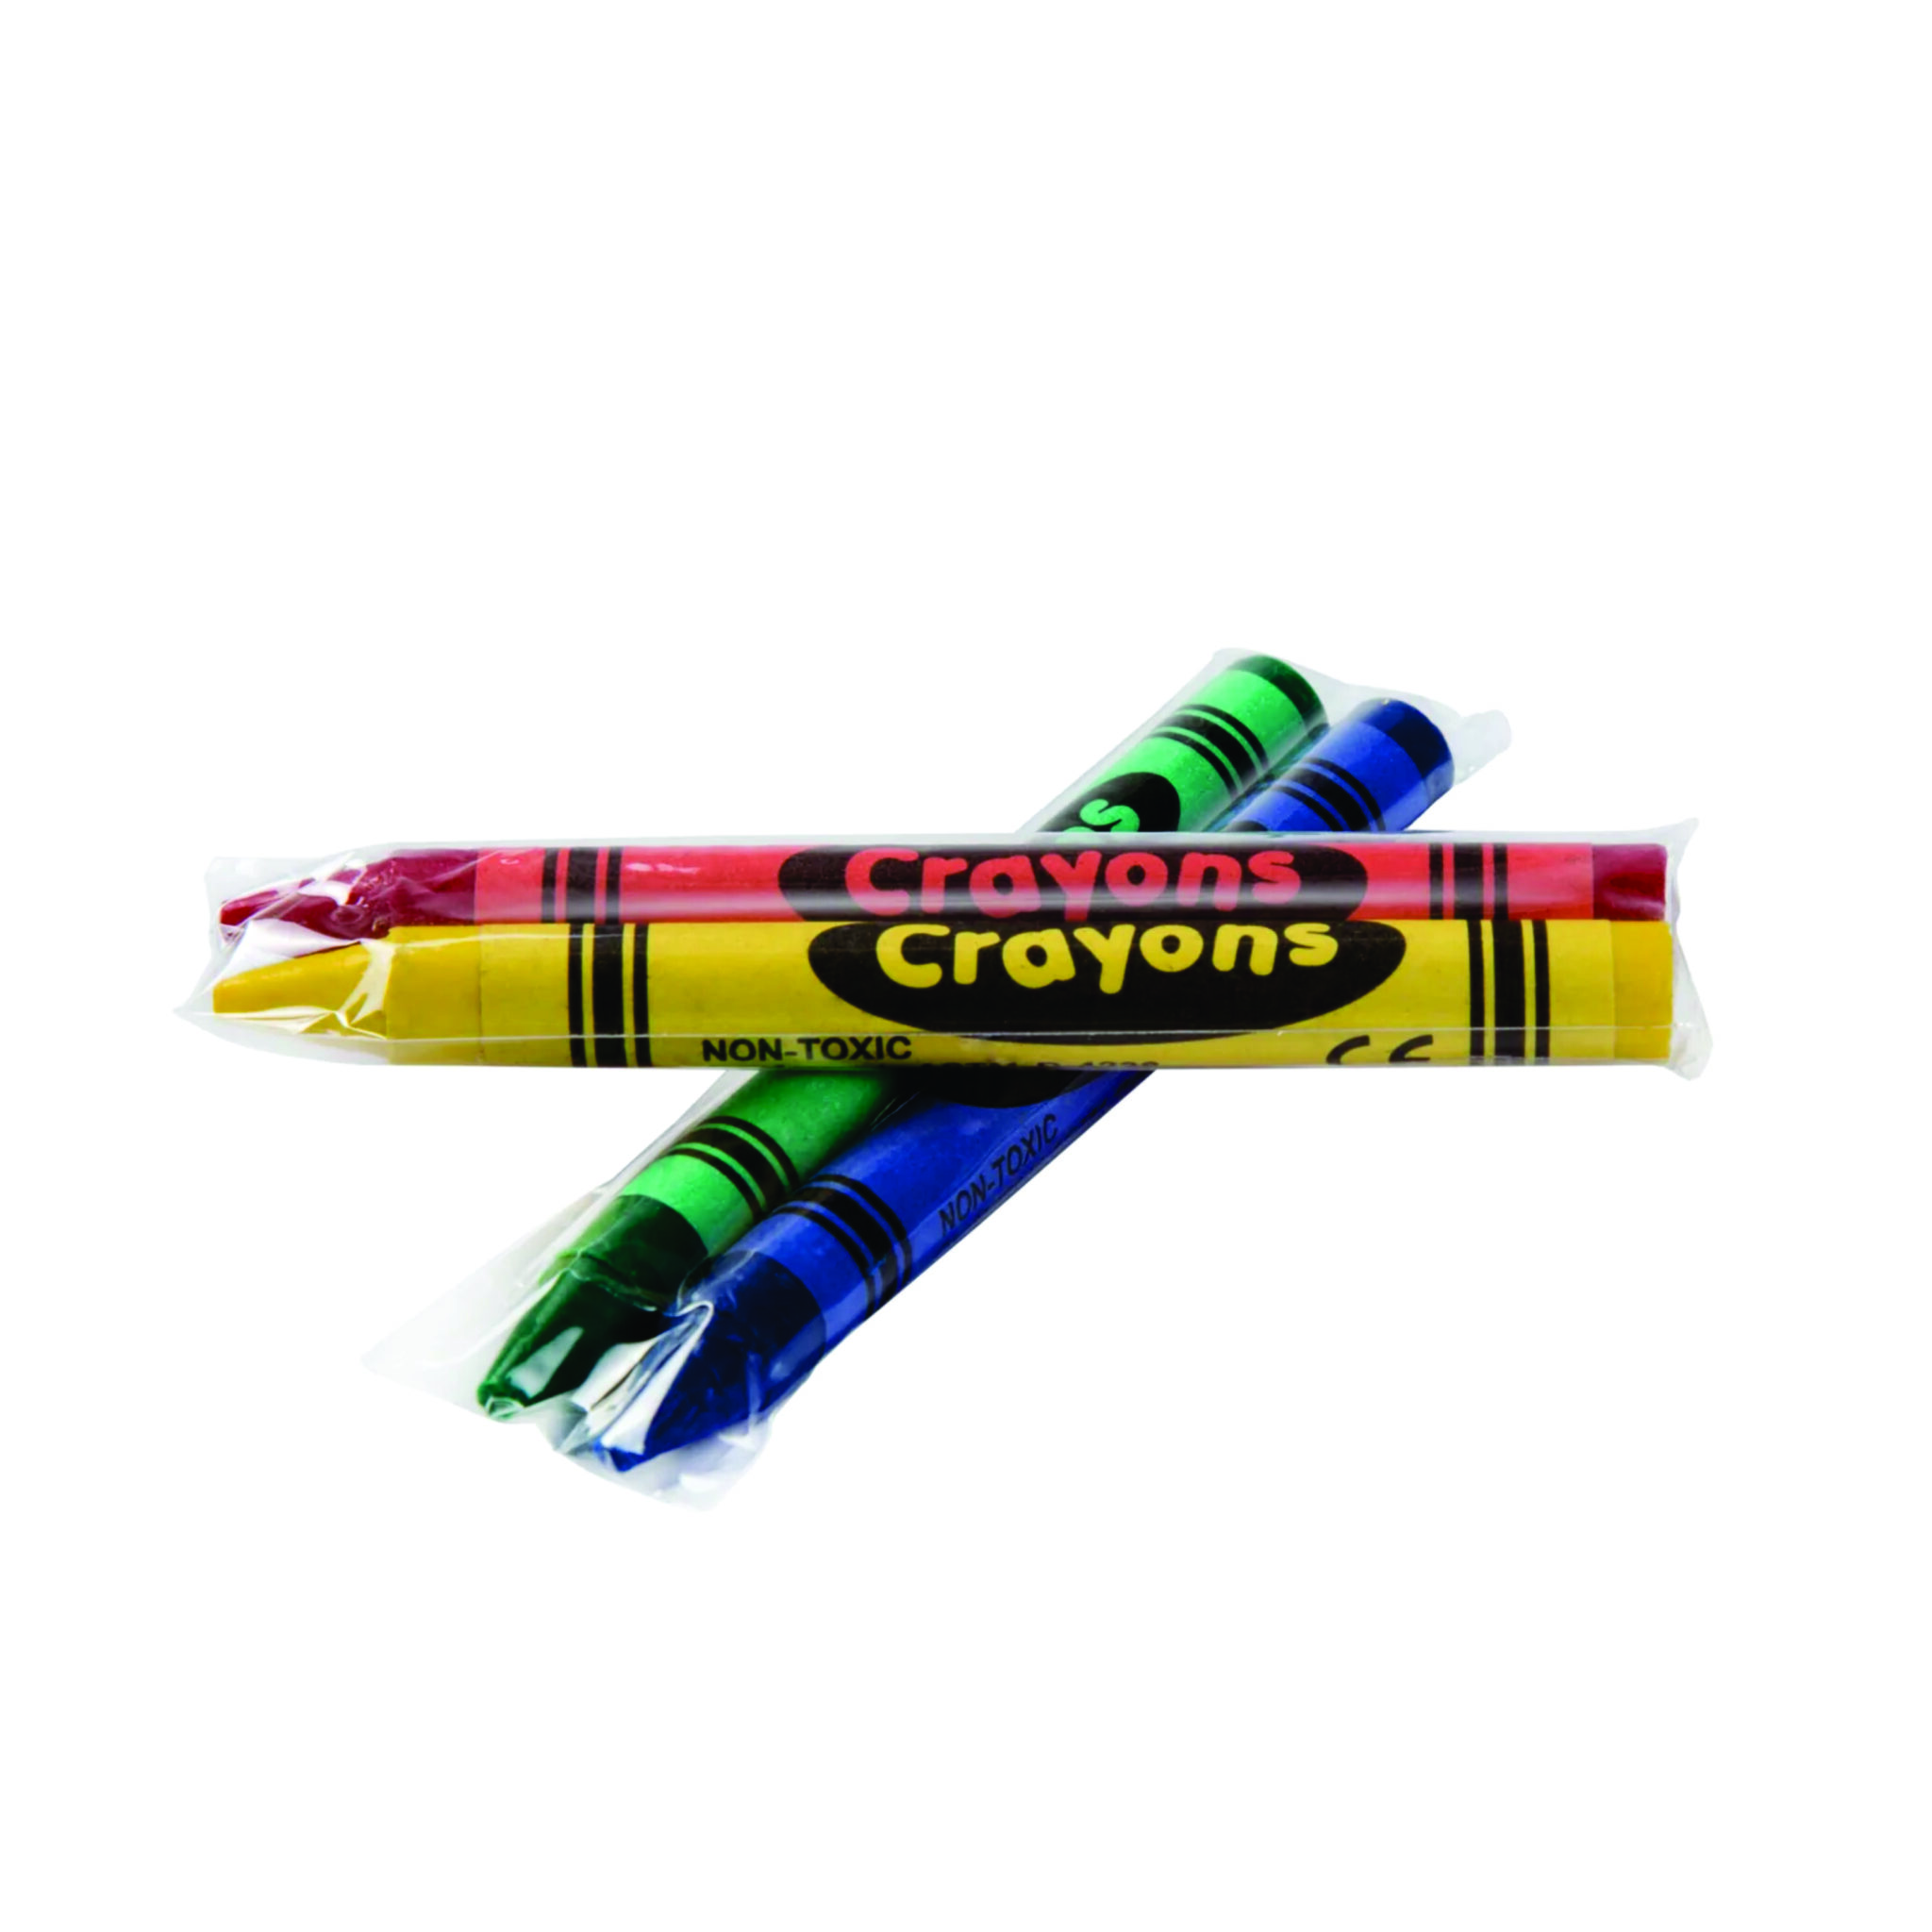 Two-Pack Wax Crayons in Cello, 1000 units (500 RD-YW, 500 BL-GR)